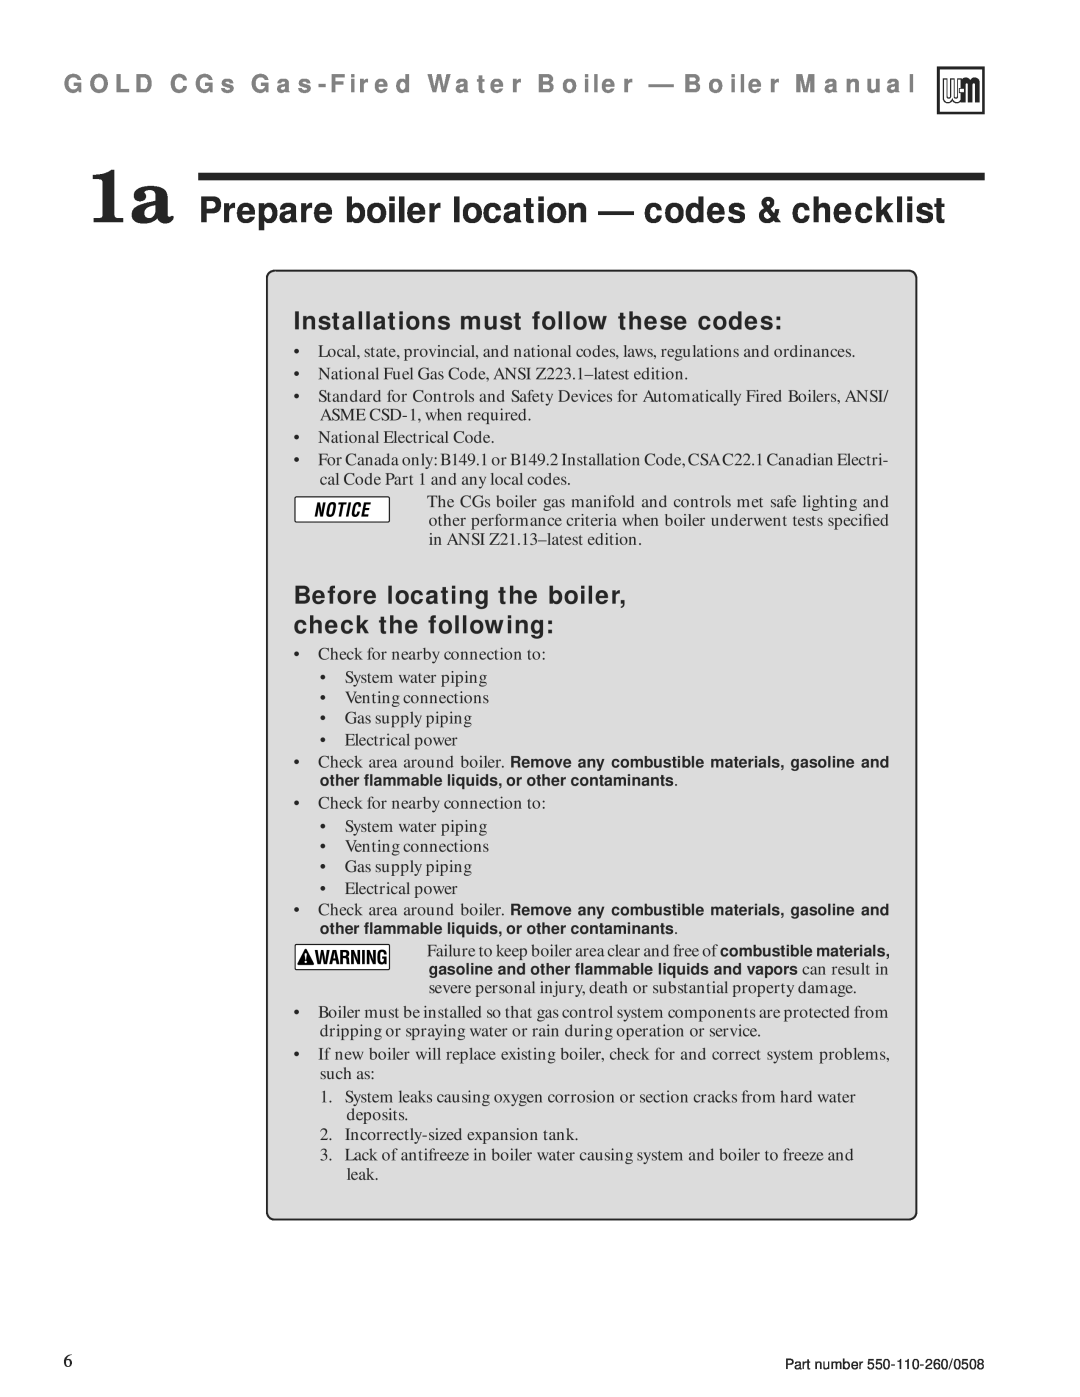 Weil-McLain 550-110-260/0508 manual 1a Prepare boiler location — codes & checklist, Installations must follow these codes 